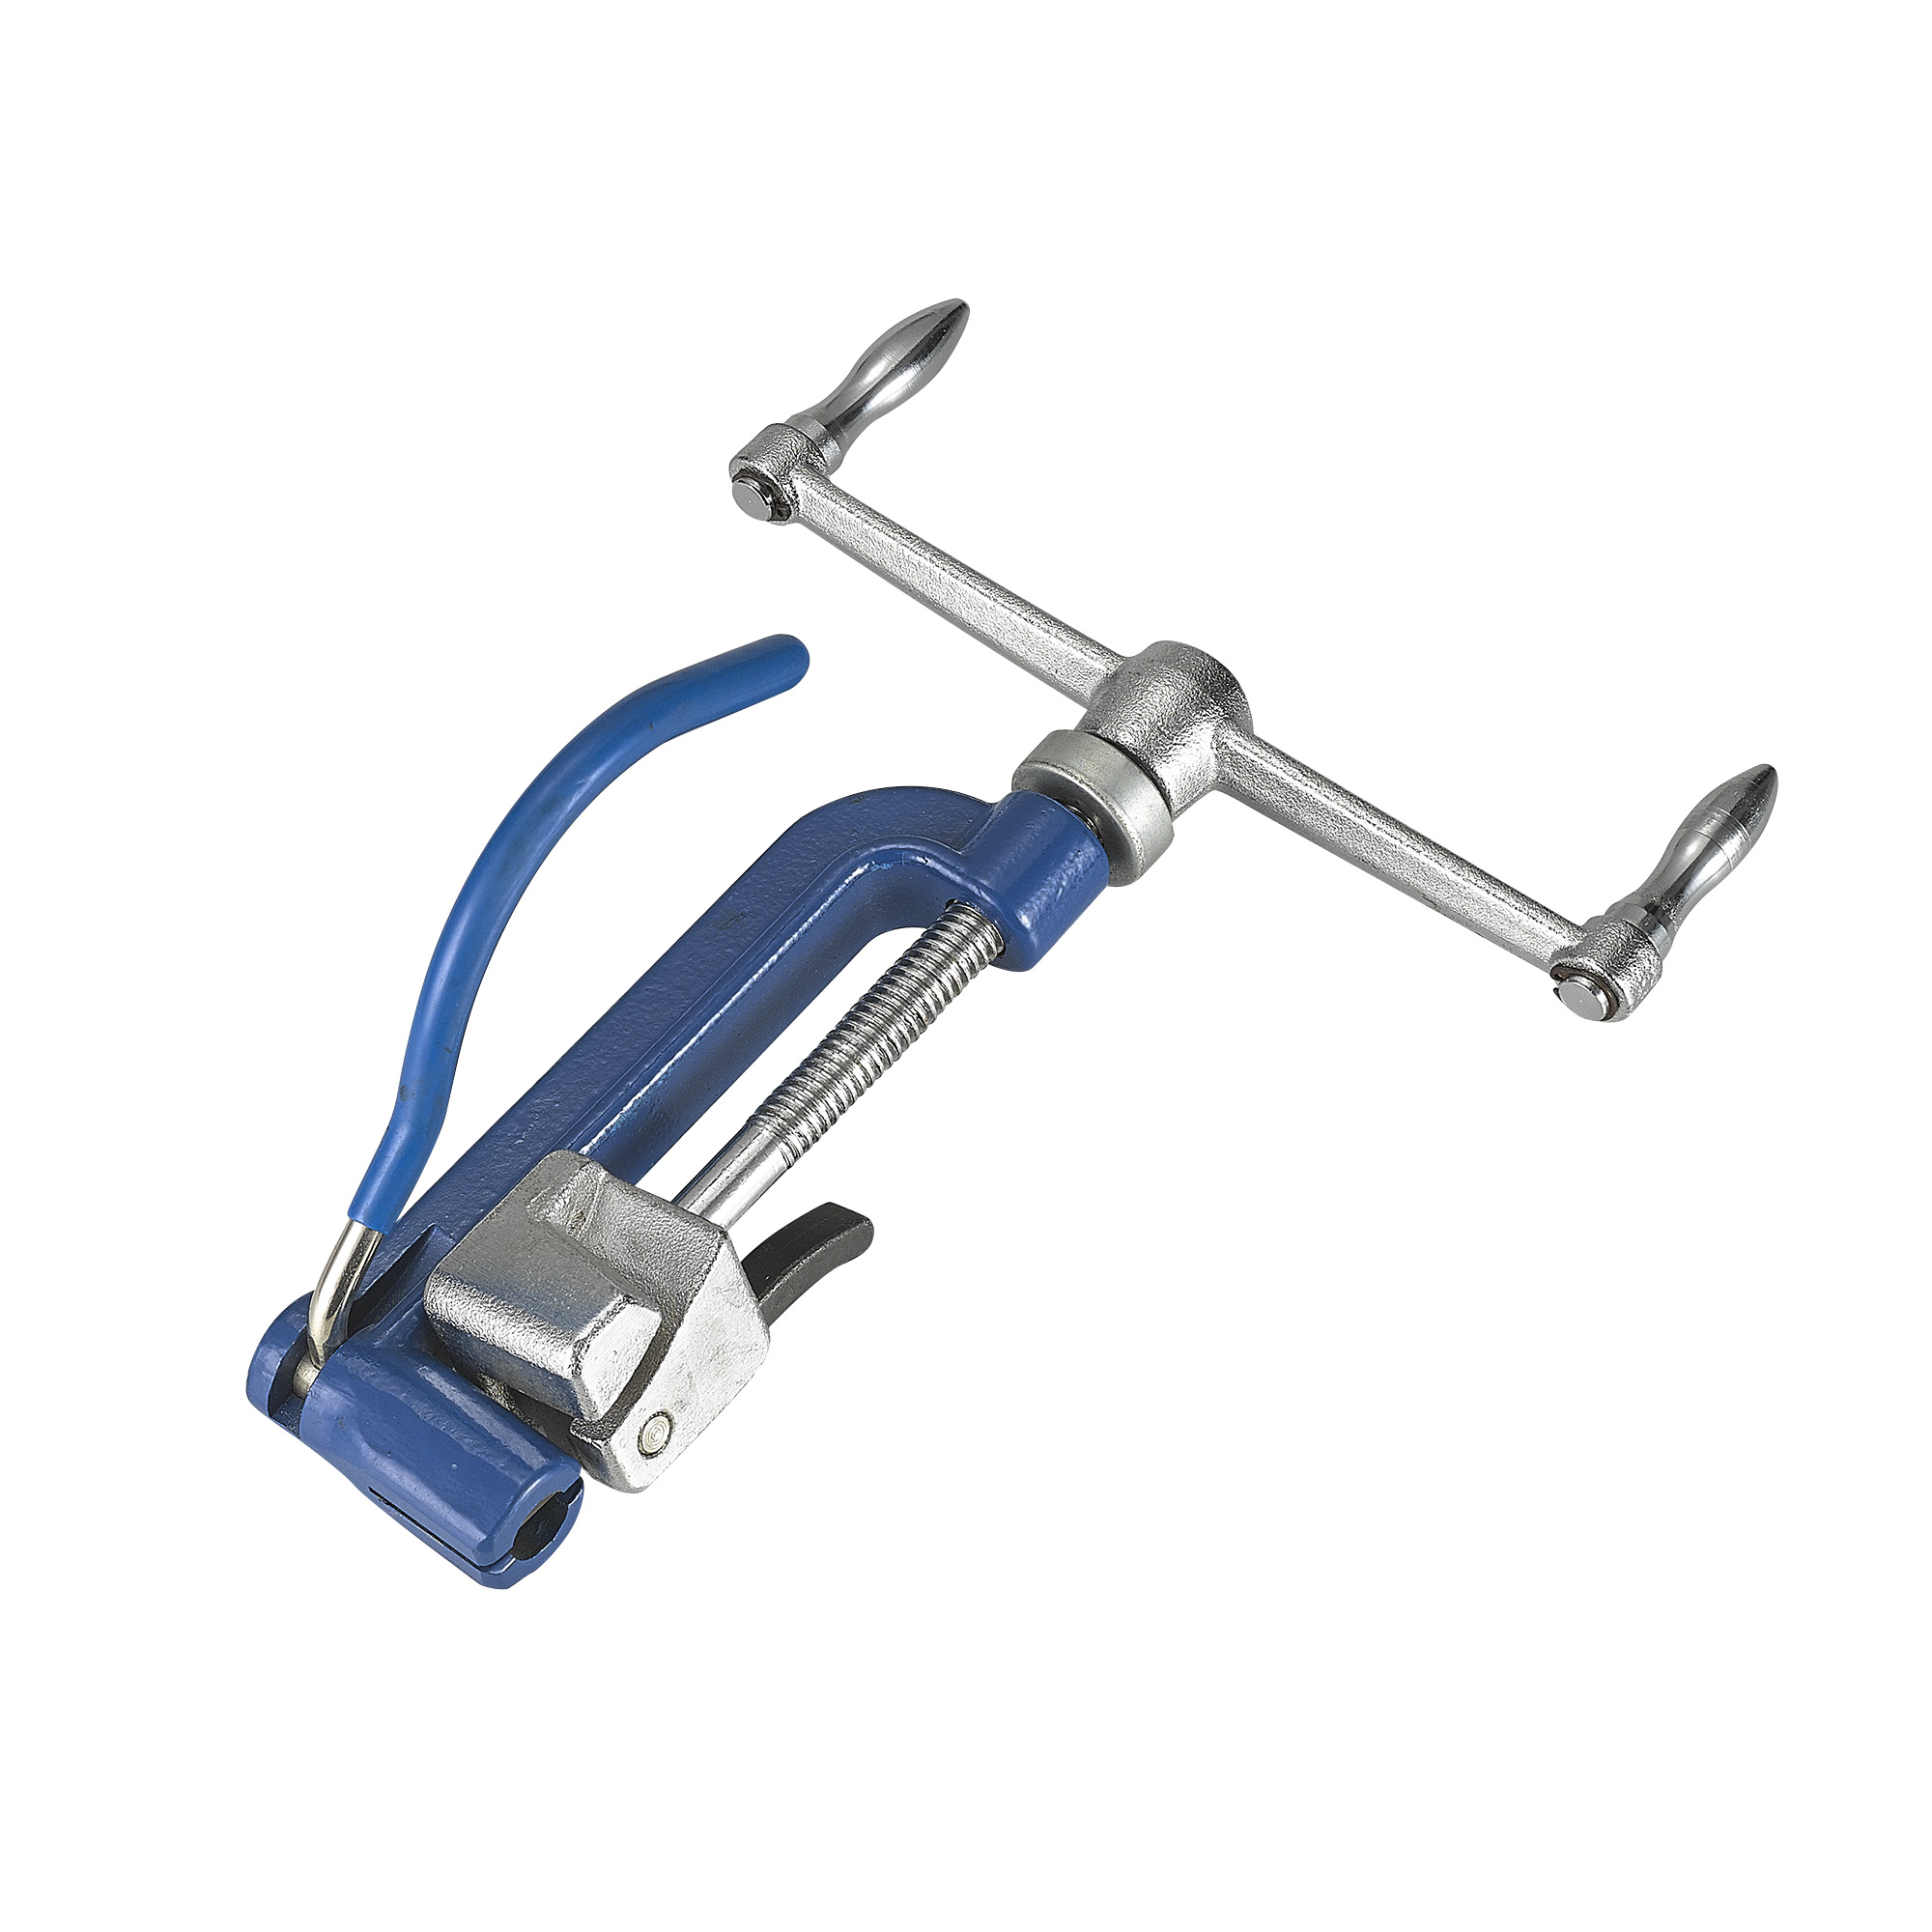 high-quality gripple tensioning tool suppliers in food processing-1